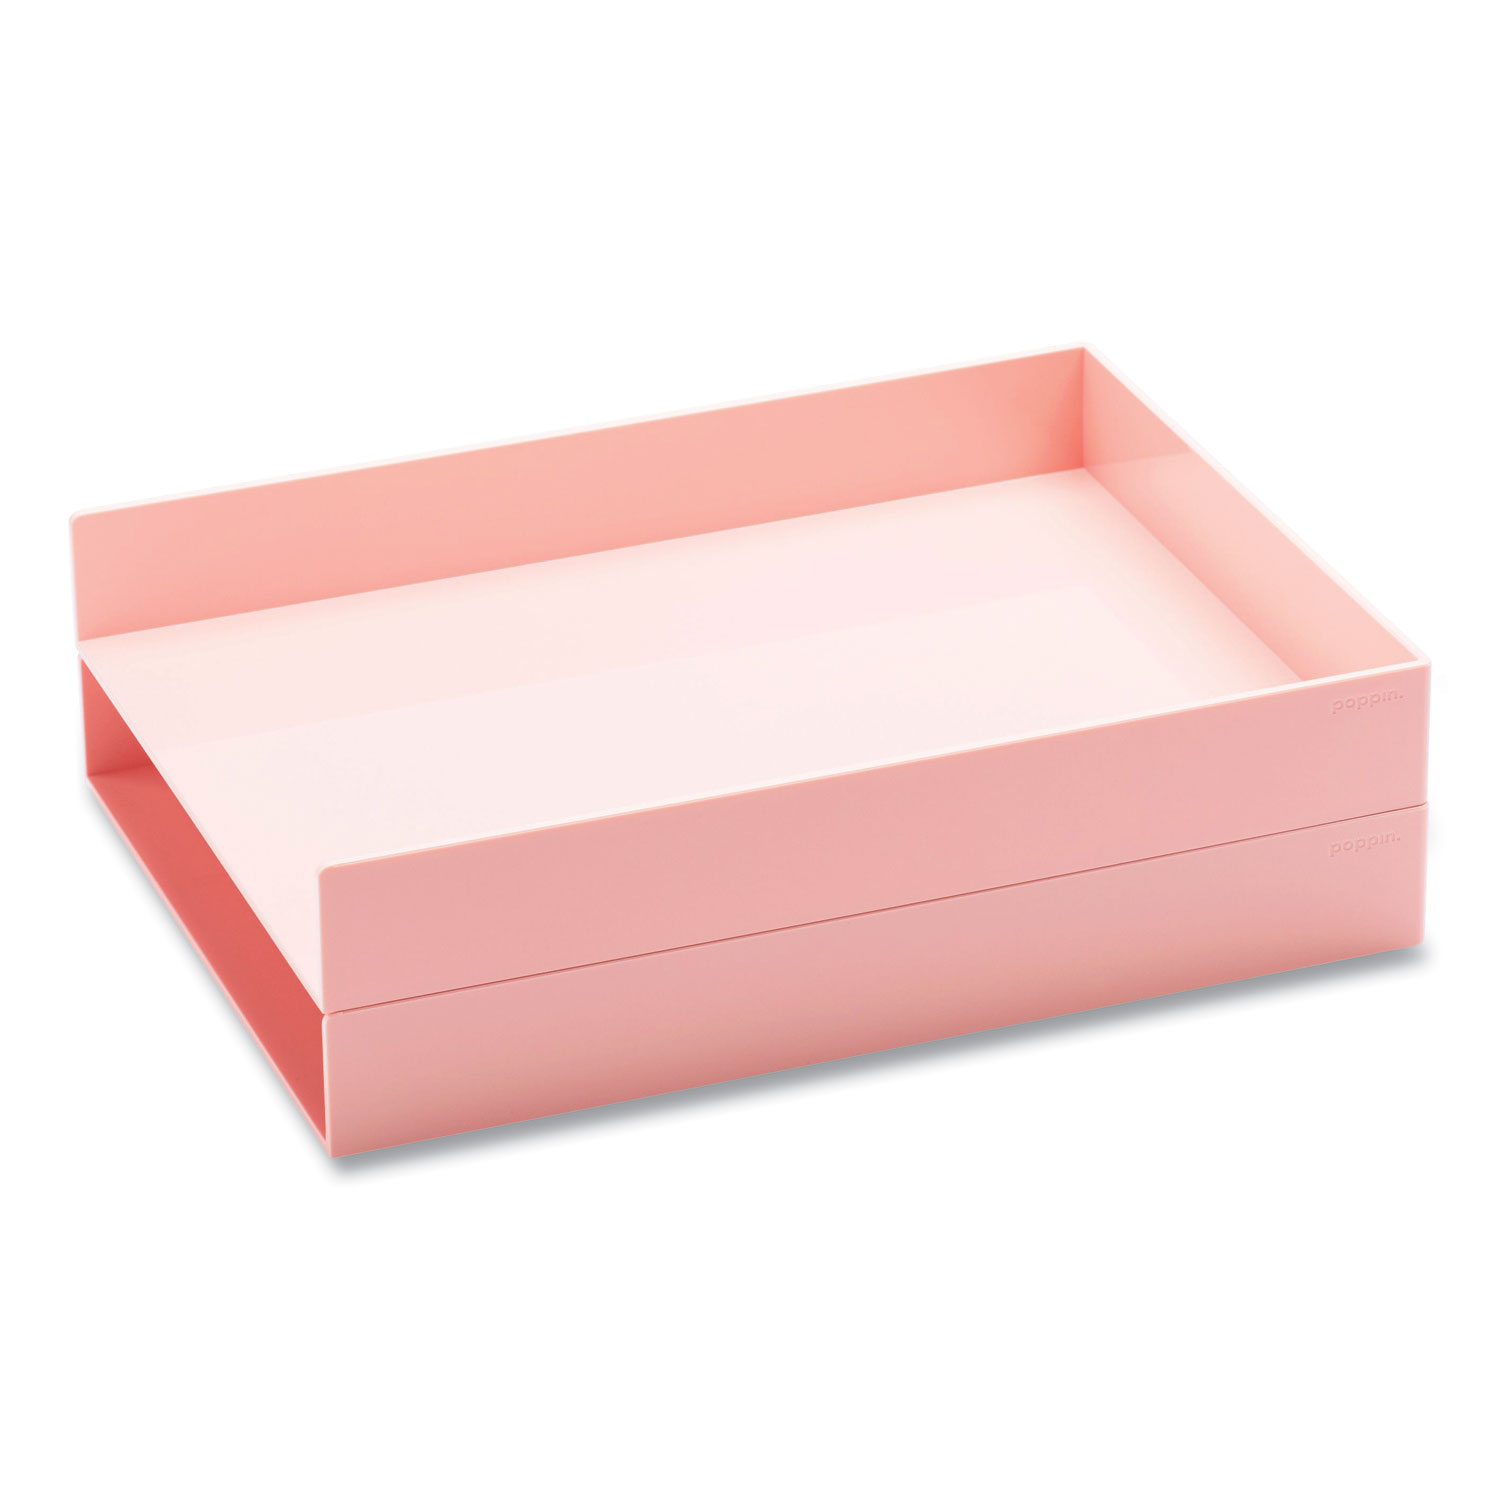  Poppin 104440 Stackable Letter Trays, 1 Section, Letter Size Files, 9.75 x 12.5 x 1.75, Blush, 2/Pack (PPJ2657272) 